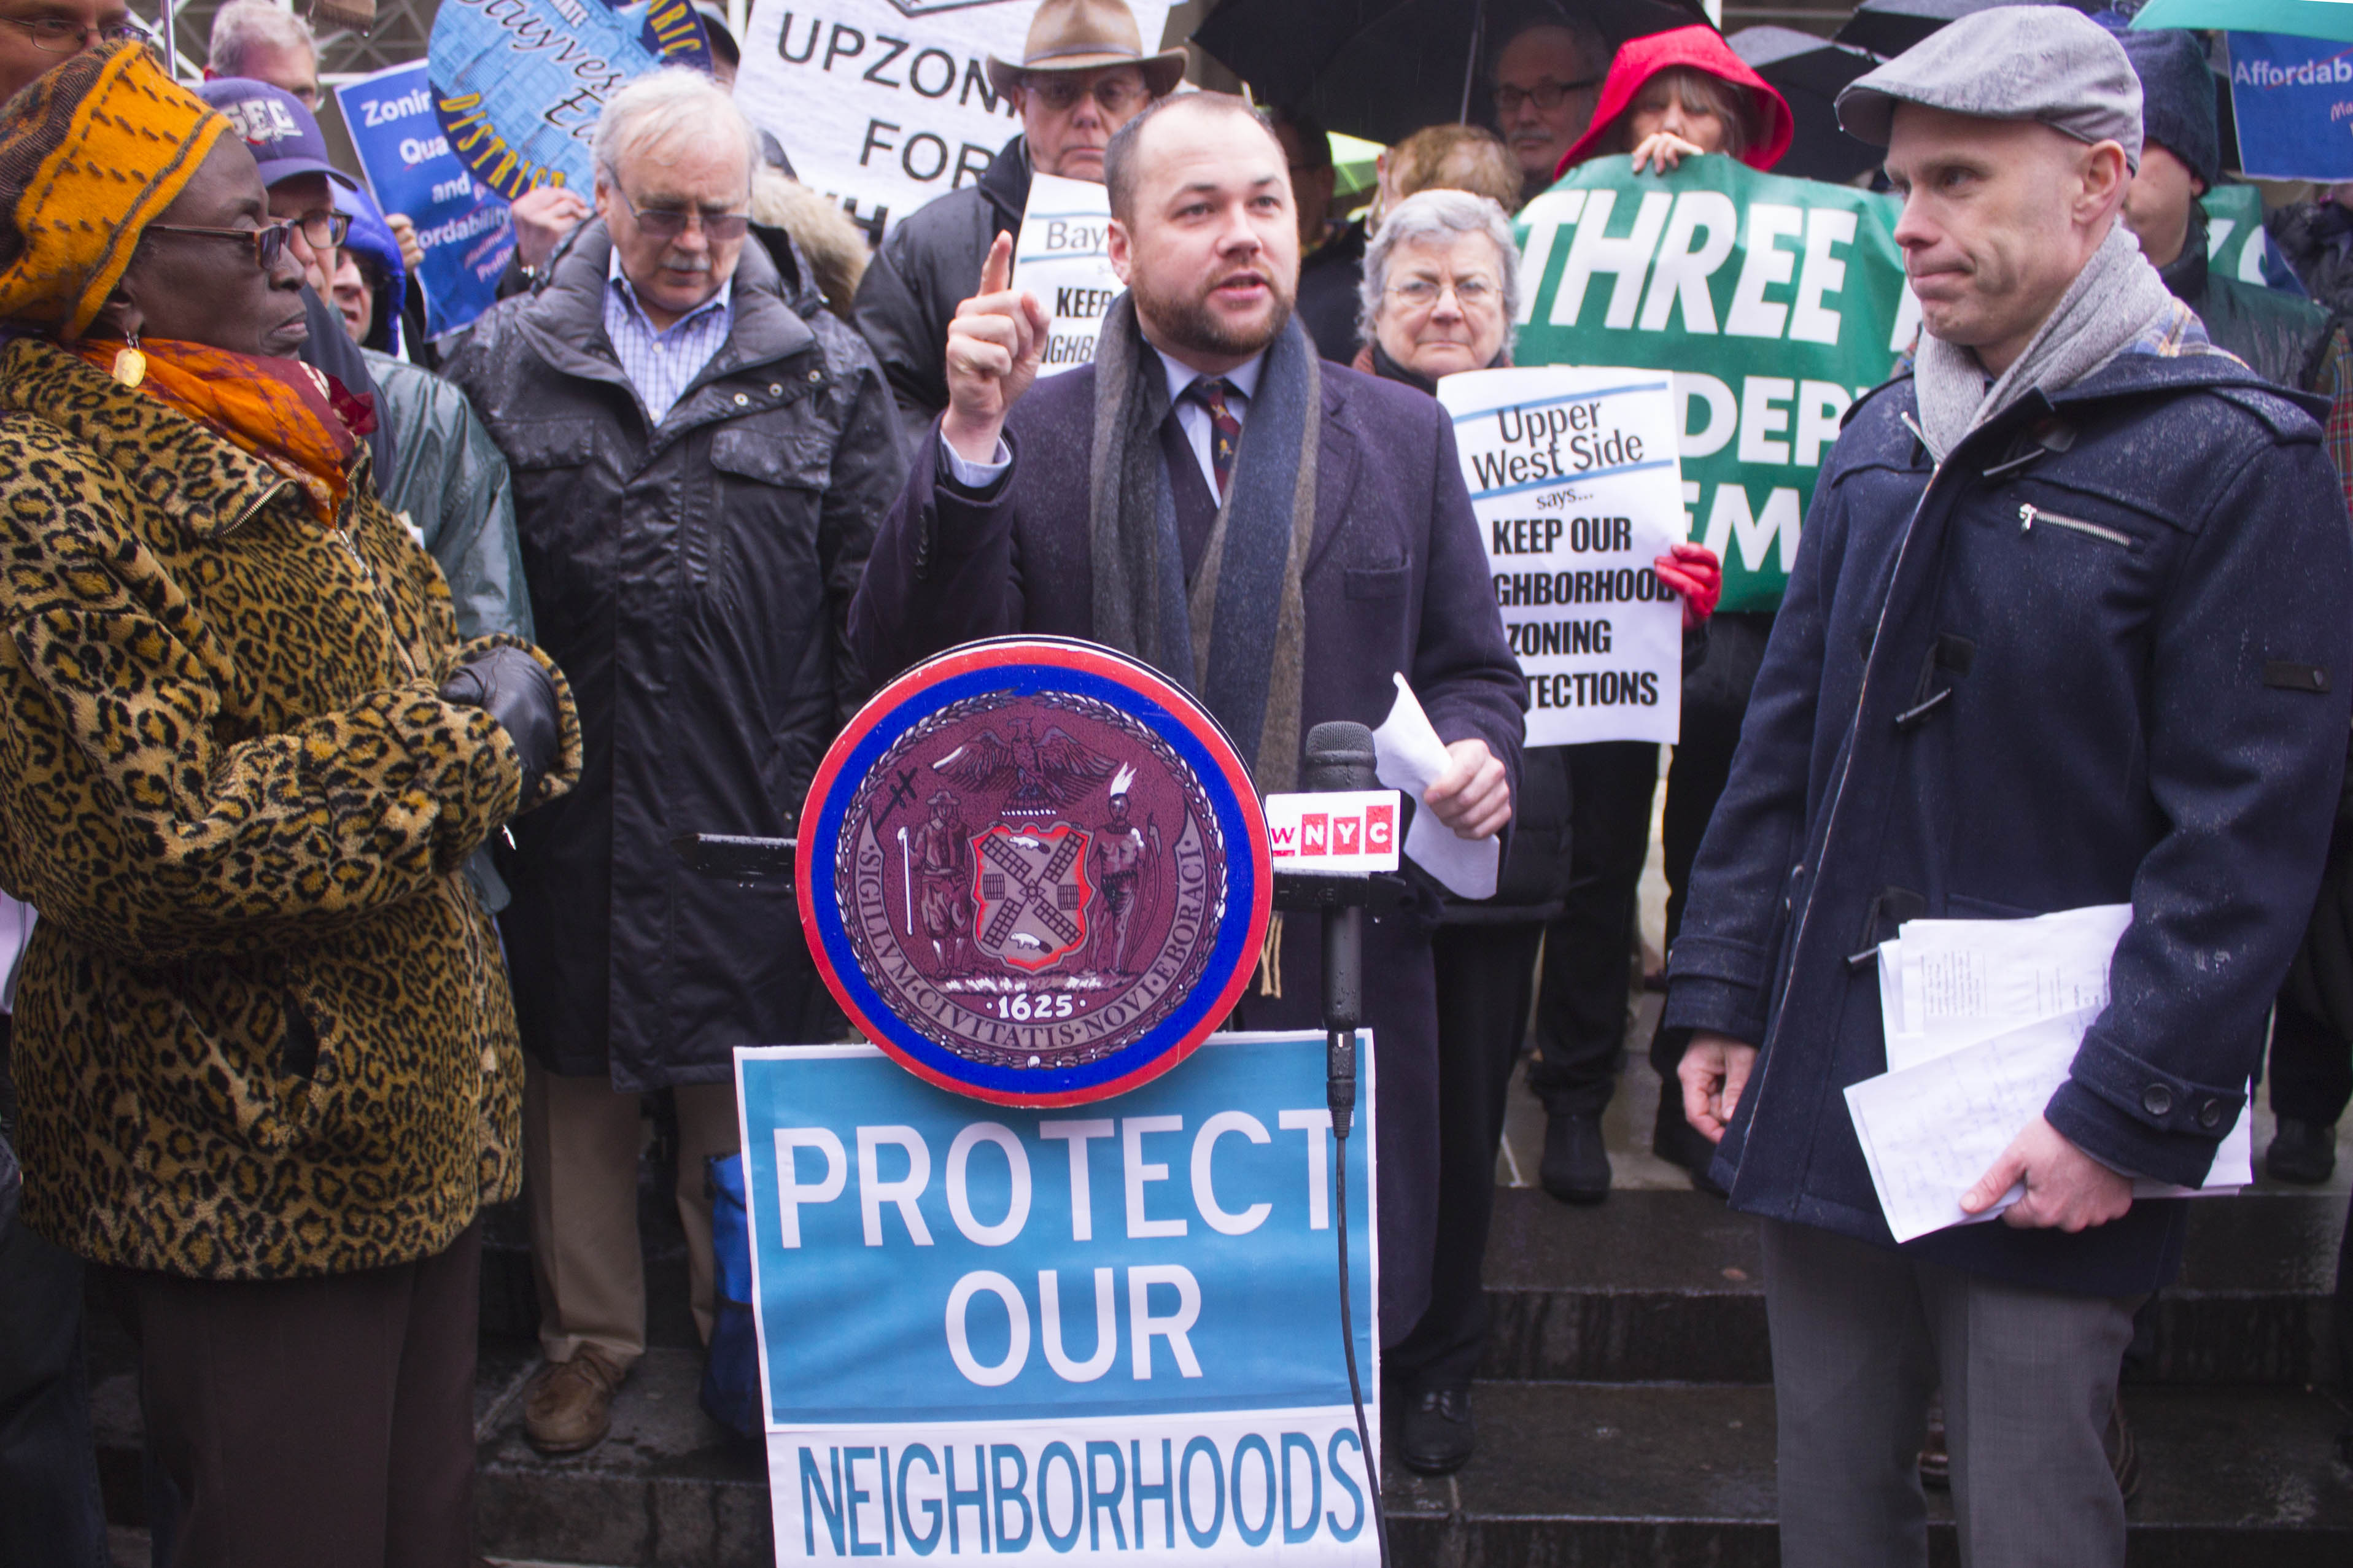 Councilmember Corey Johnson, at podium, and G.V.S.H.P Director Andrew Berman, at right, were among the speakers at a rally before the meeting. The advocates and politicians criticized the proposed changes and said the public-review process is moving way too fast.